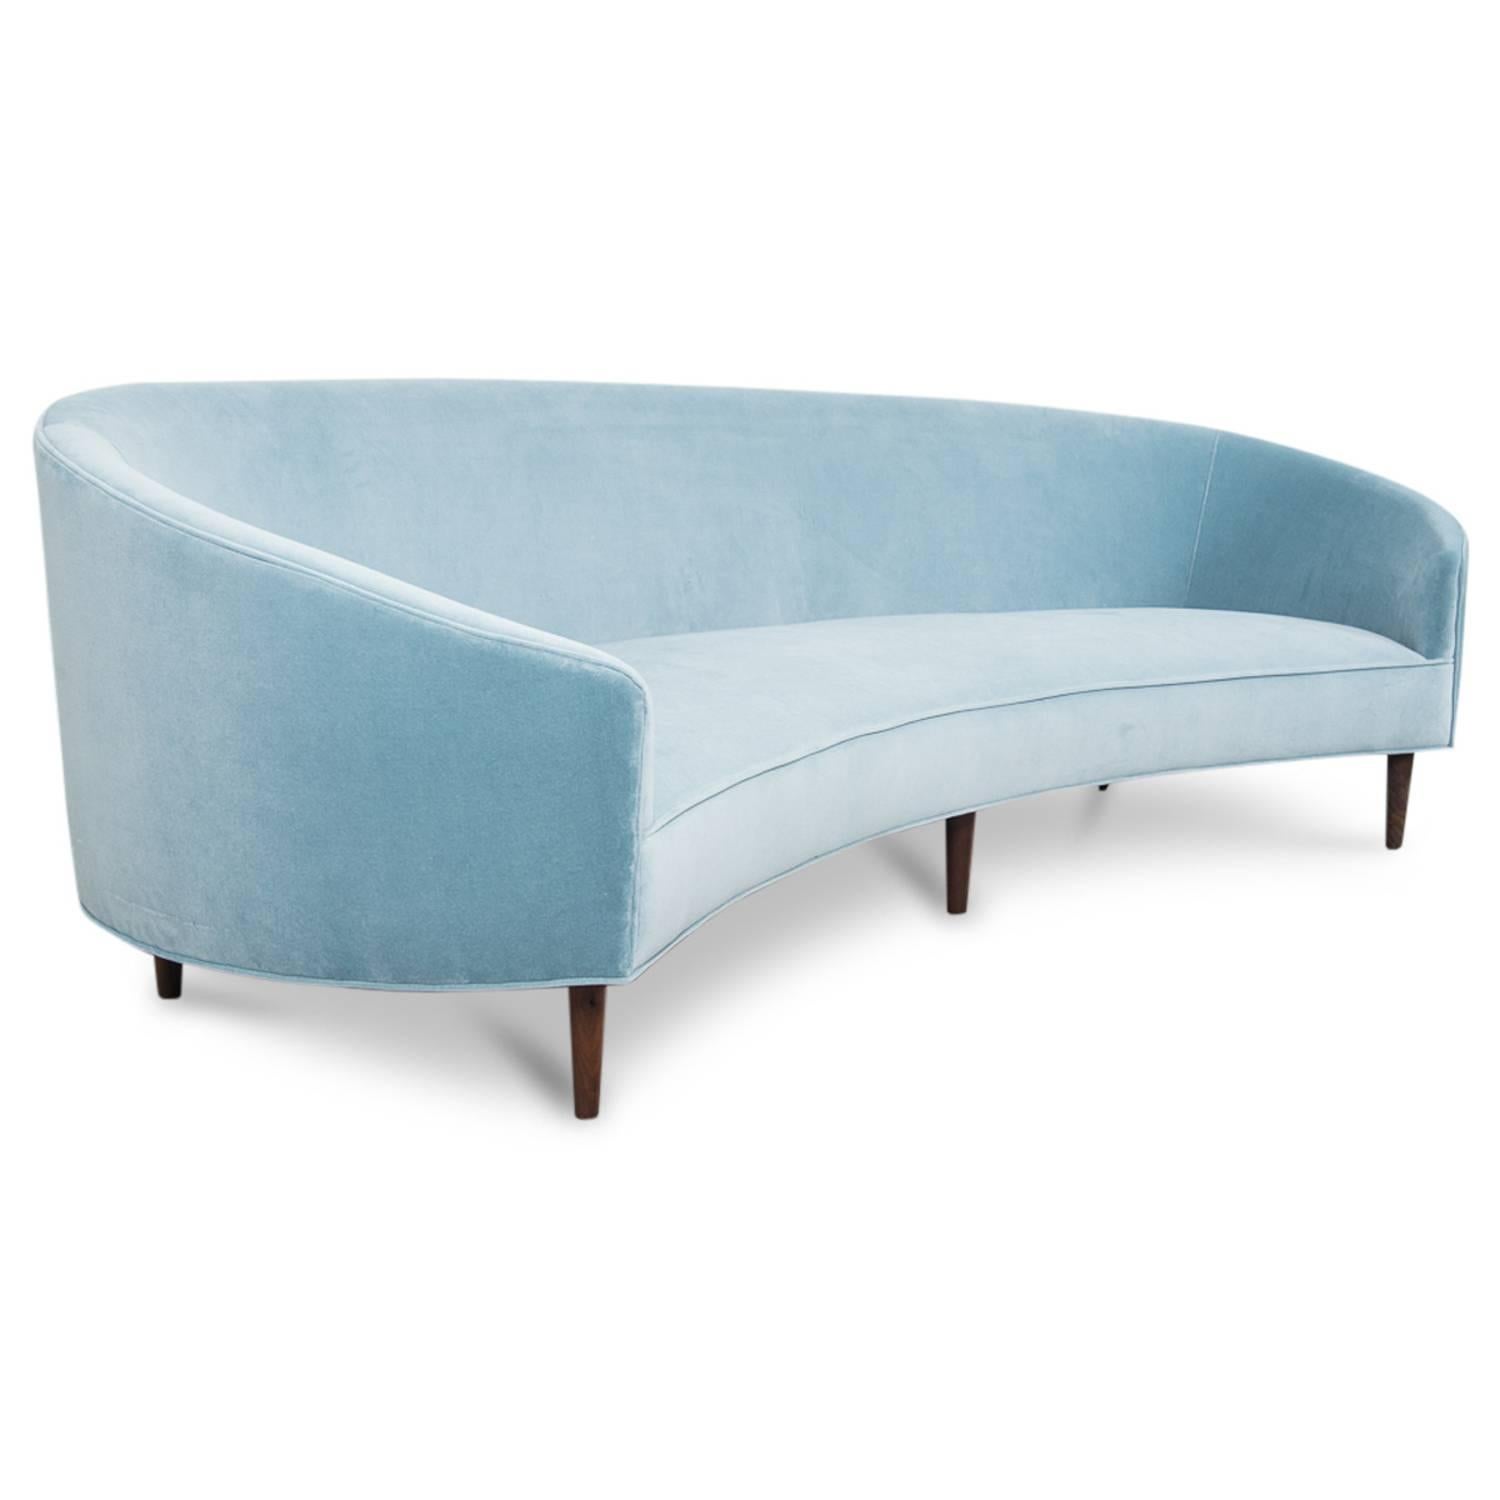 With Classic clean lines and sharp curves comes Modshop's Art Deco sofa. Uniquely shaped, similar to a crescent, curved in arms and six walnut cone legs put together in elegance. Shown in Capri blue velvet.

Measures: 105